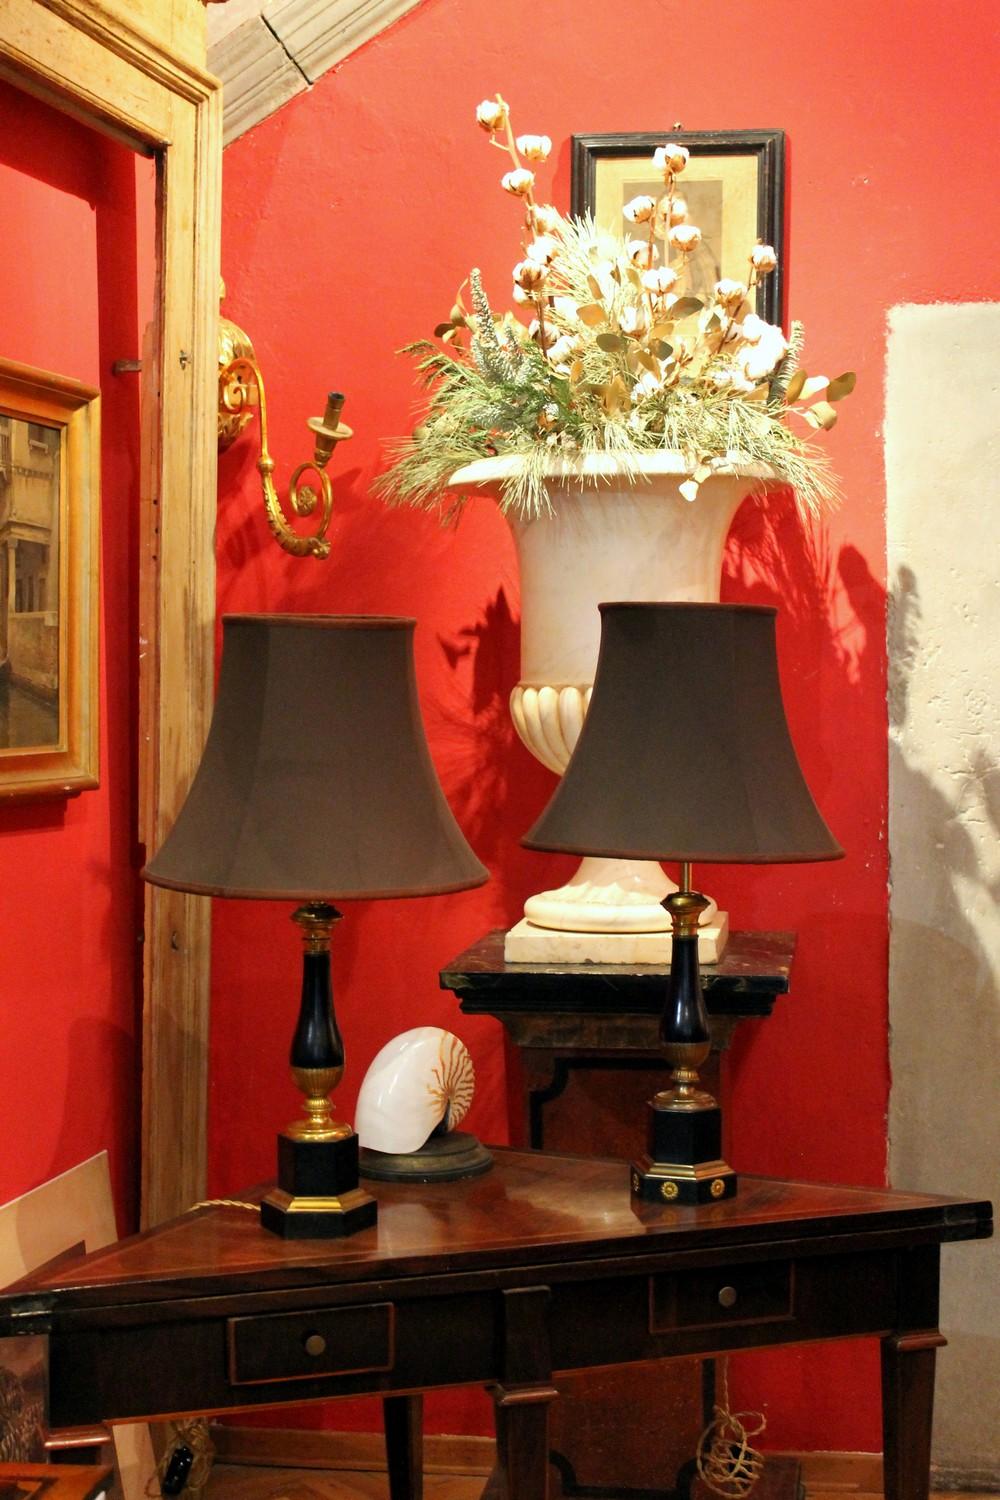 20th Century French Black Enamel Tole and Gilt Bronze Table Lamp with Silk Shade For Sale 5